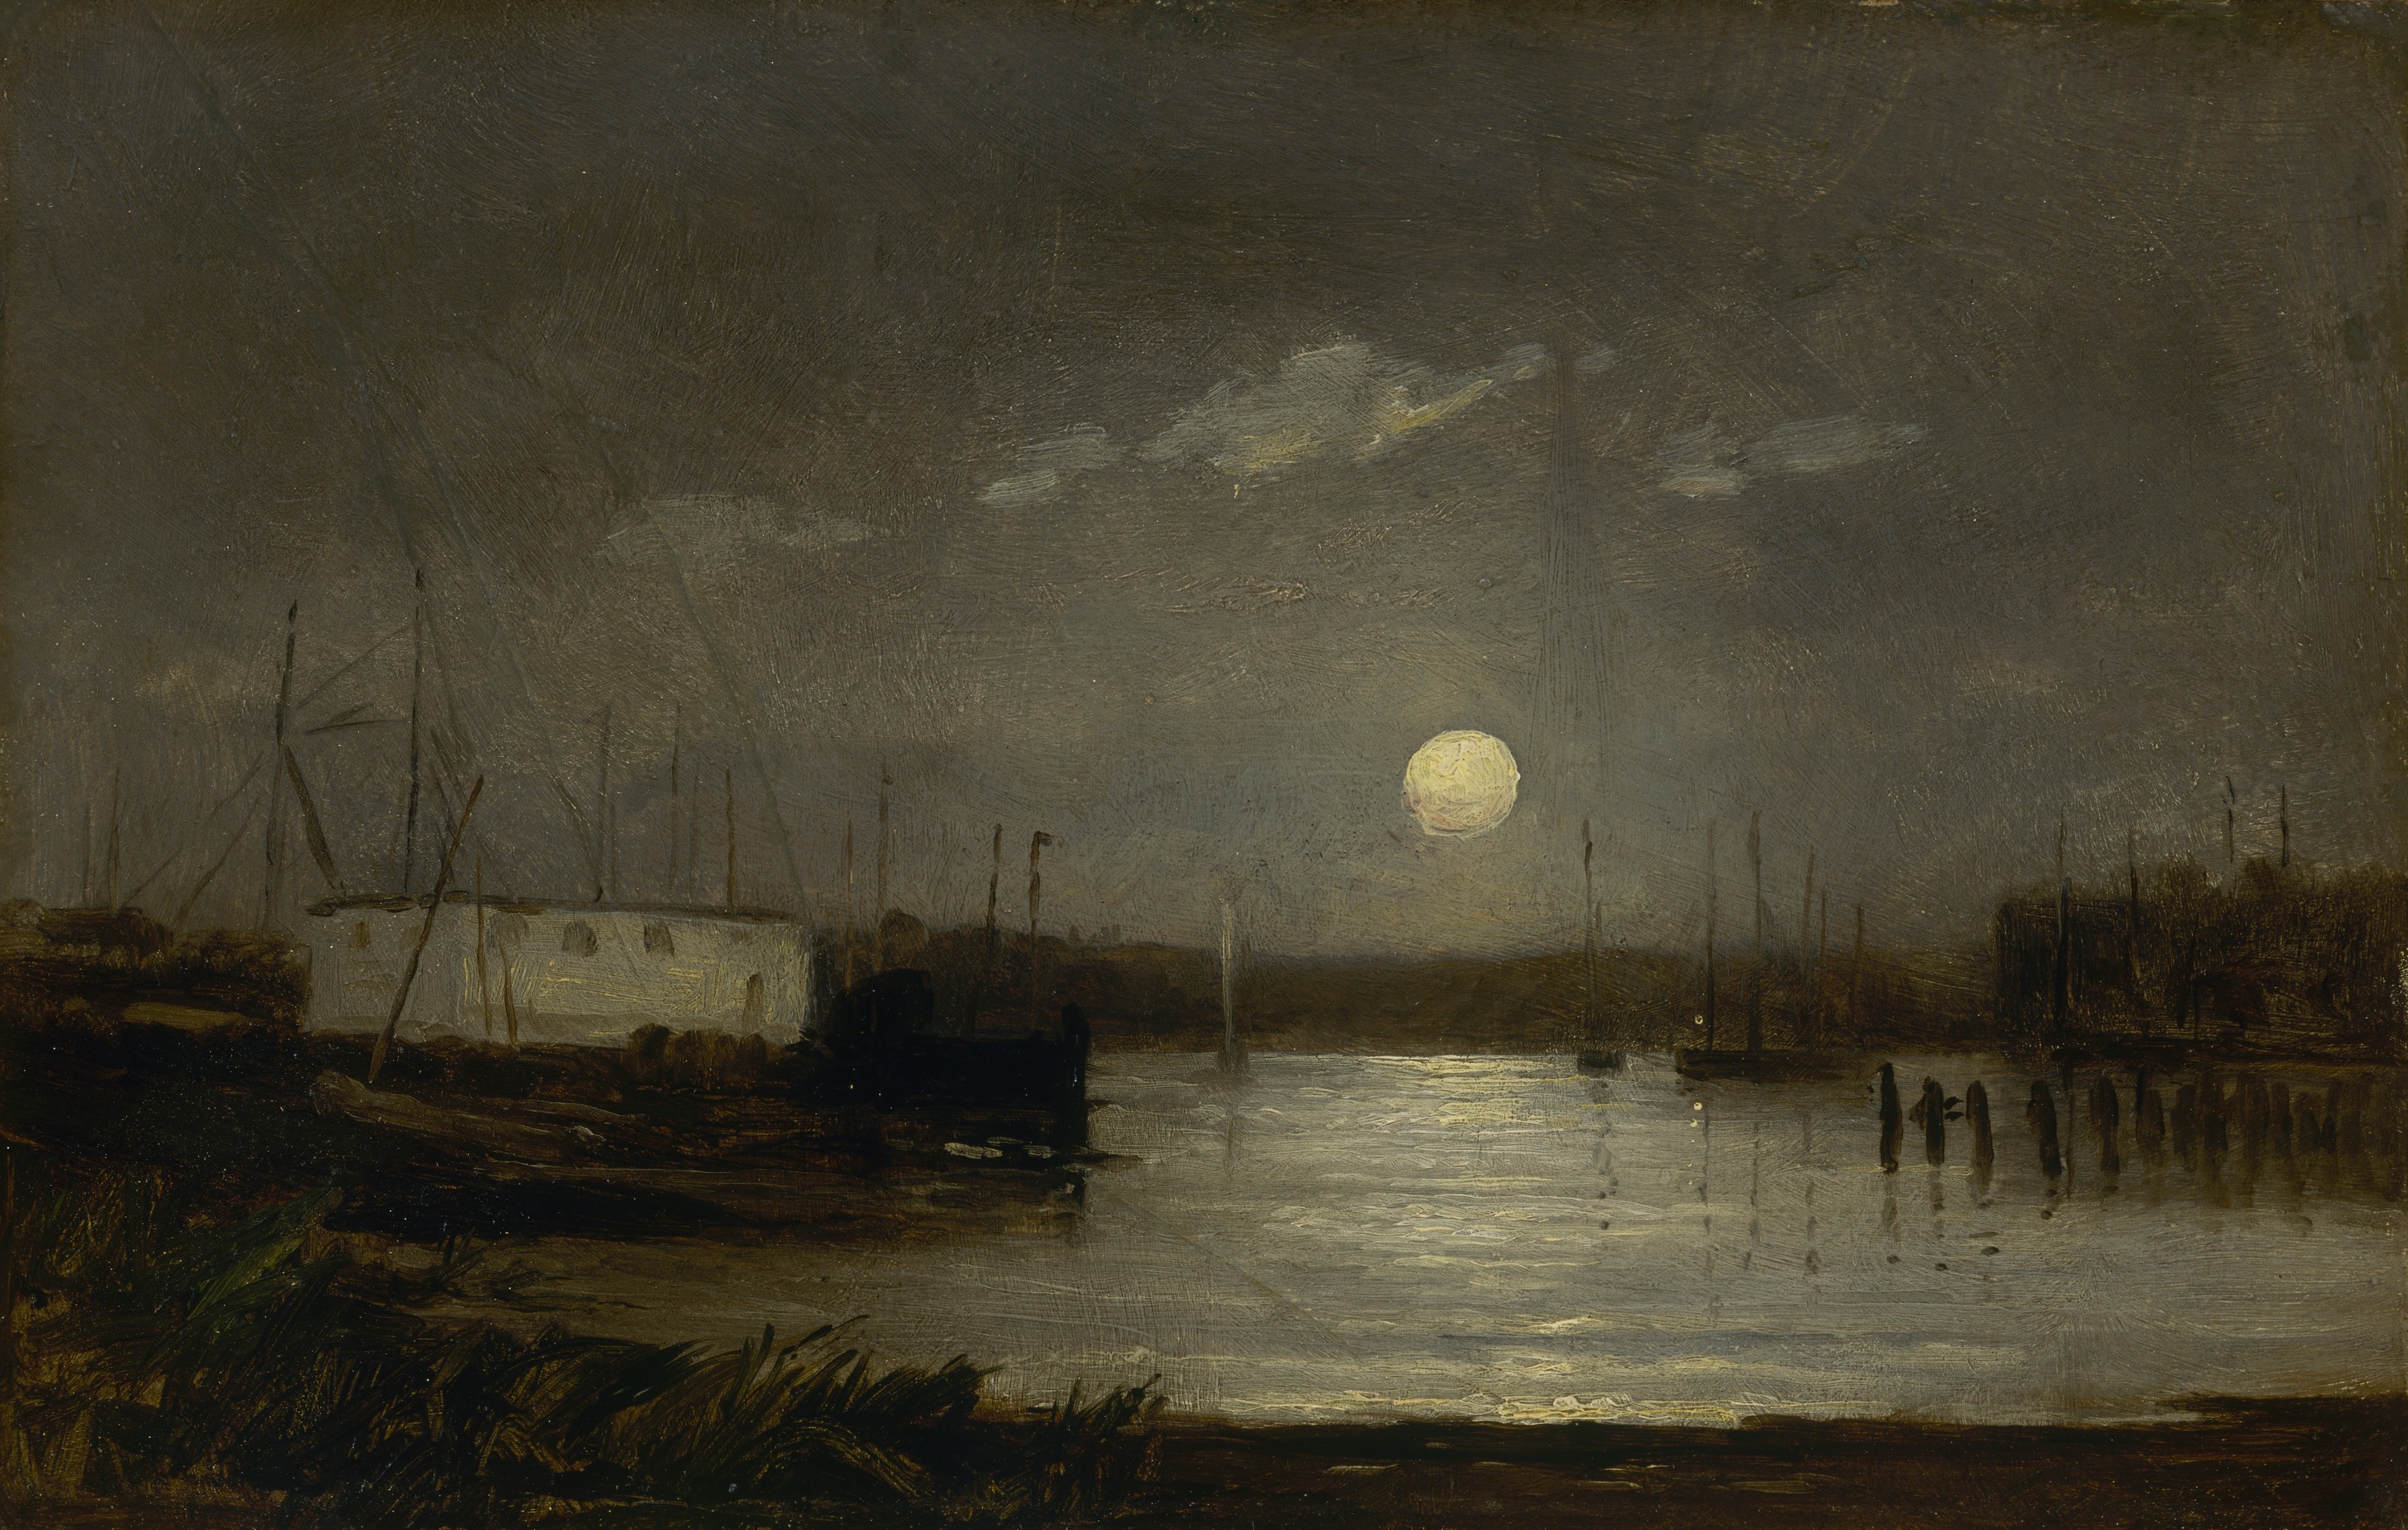 Untitled (moon over a harbor, wharf scene with full moon and masts of boats) by Edward Mitchell Bannister - c. 1868 - 24.5 x 38.7 cm Smithsonian American Art Museum